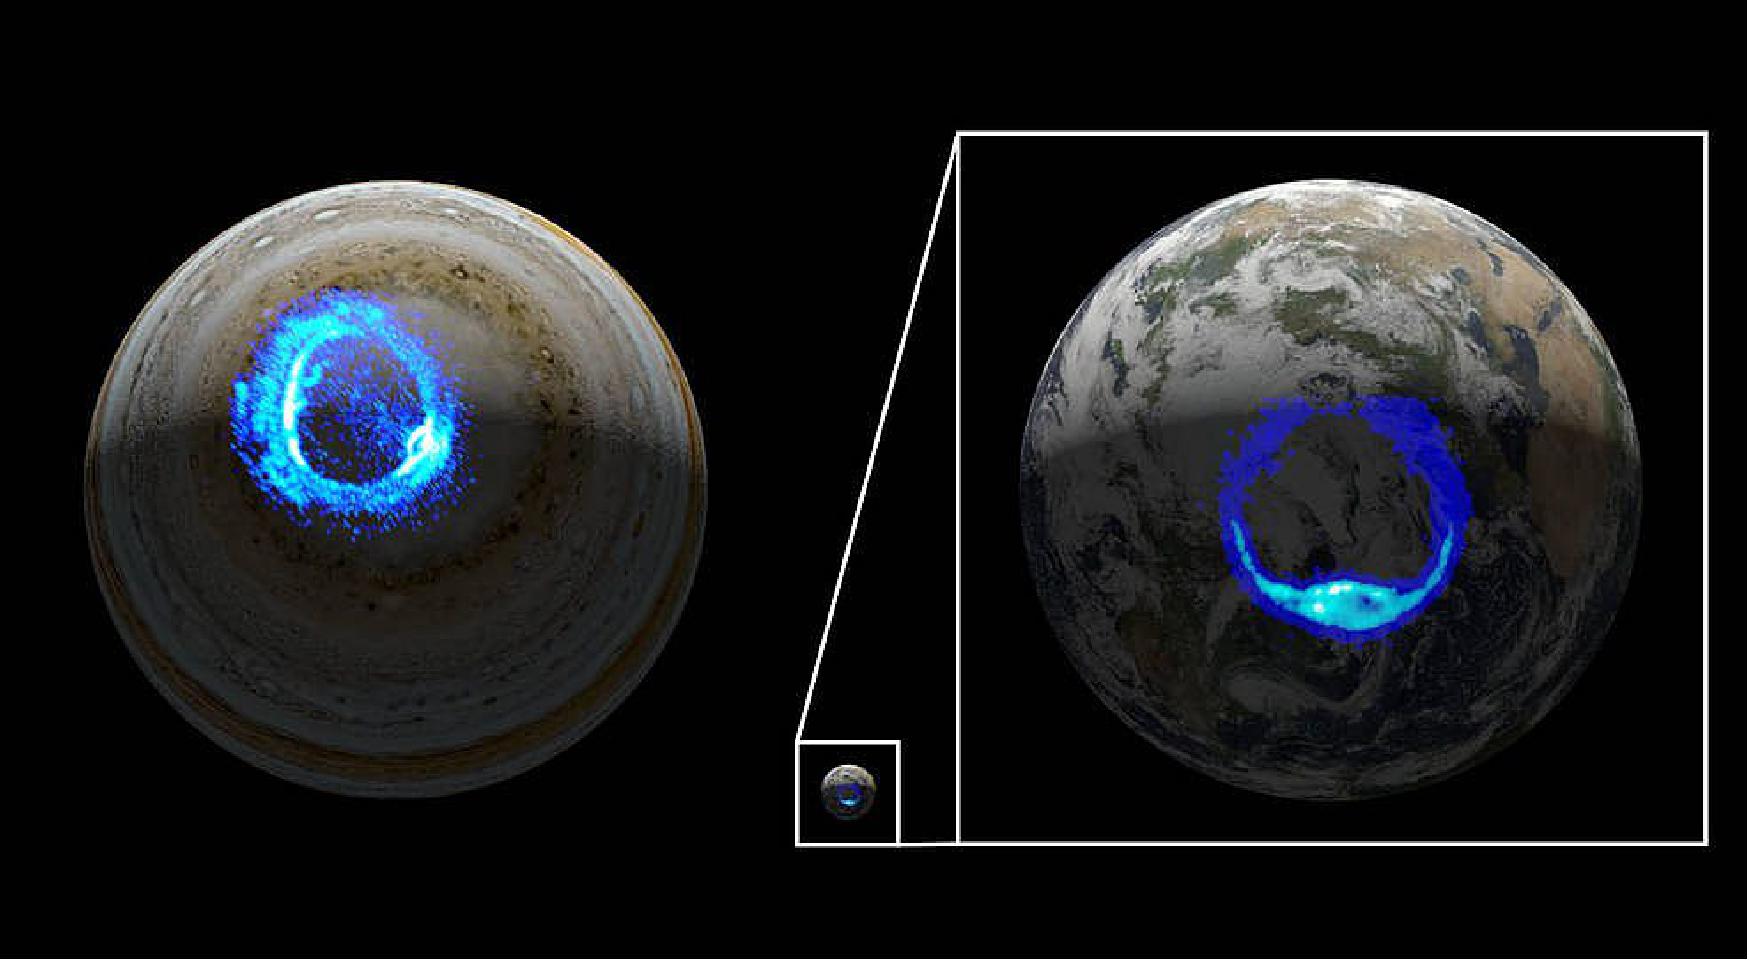 Figure 21: This illustration depicts ultraviolet polar aurorae on Jupiter and Earth. While the diameter of the Jovian world is 10 times larger than that of Earth, both planets have markedly similar aurora (image credits: NASA/JPL-Caltech/SwRI/UVS/STScI/MODIS/WIC/IMAGE/ULiège)